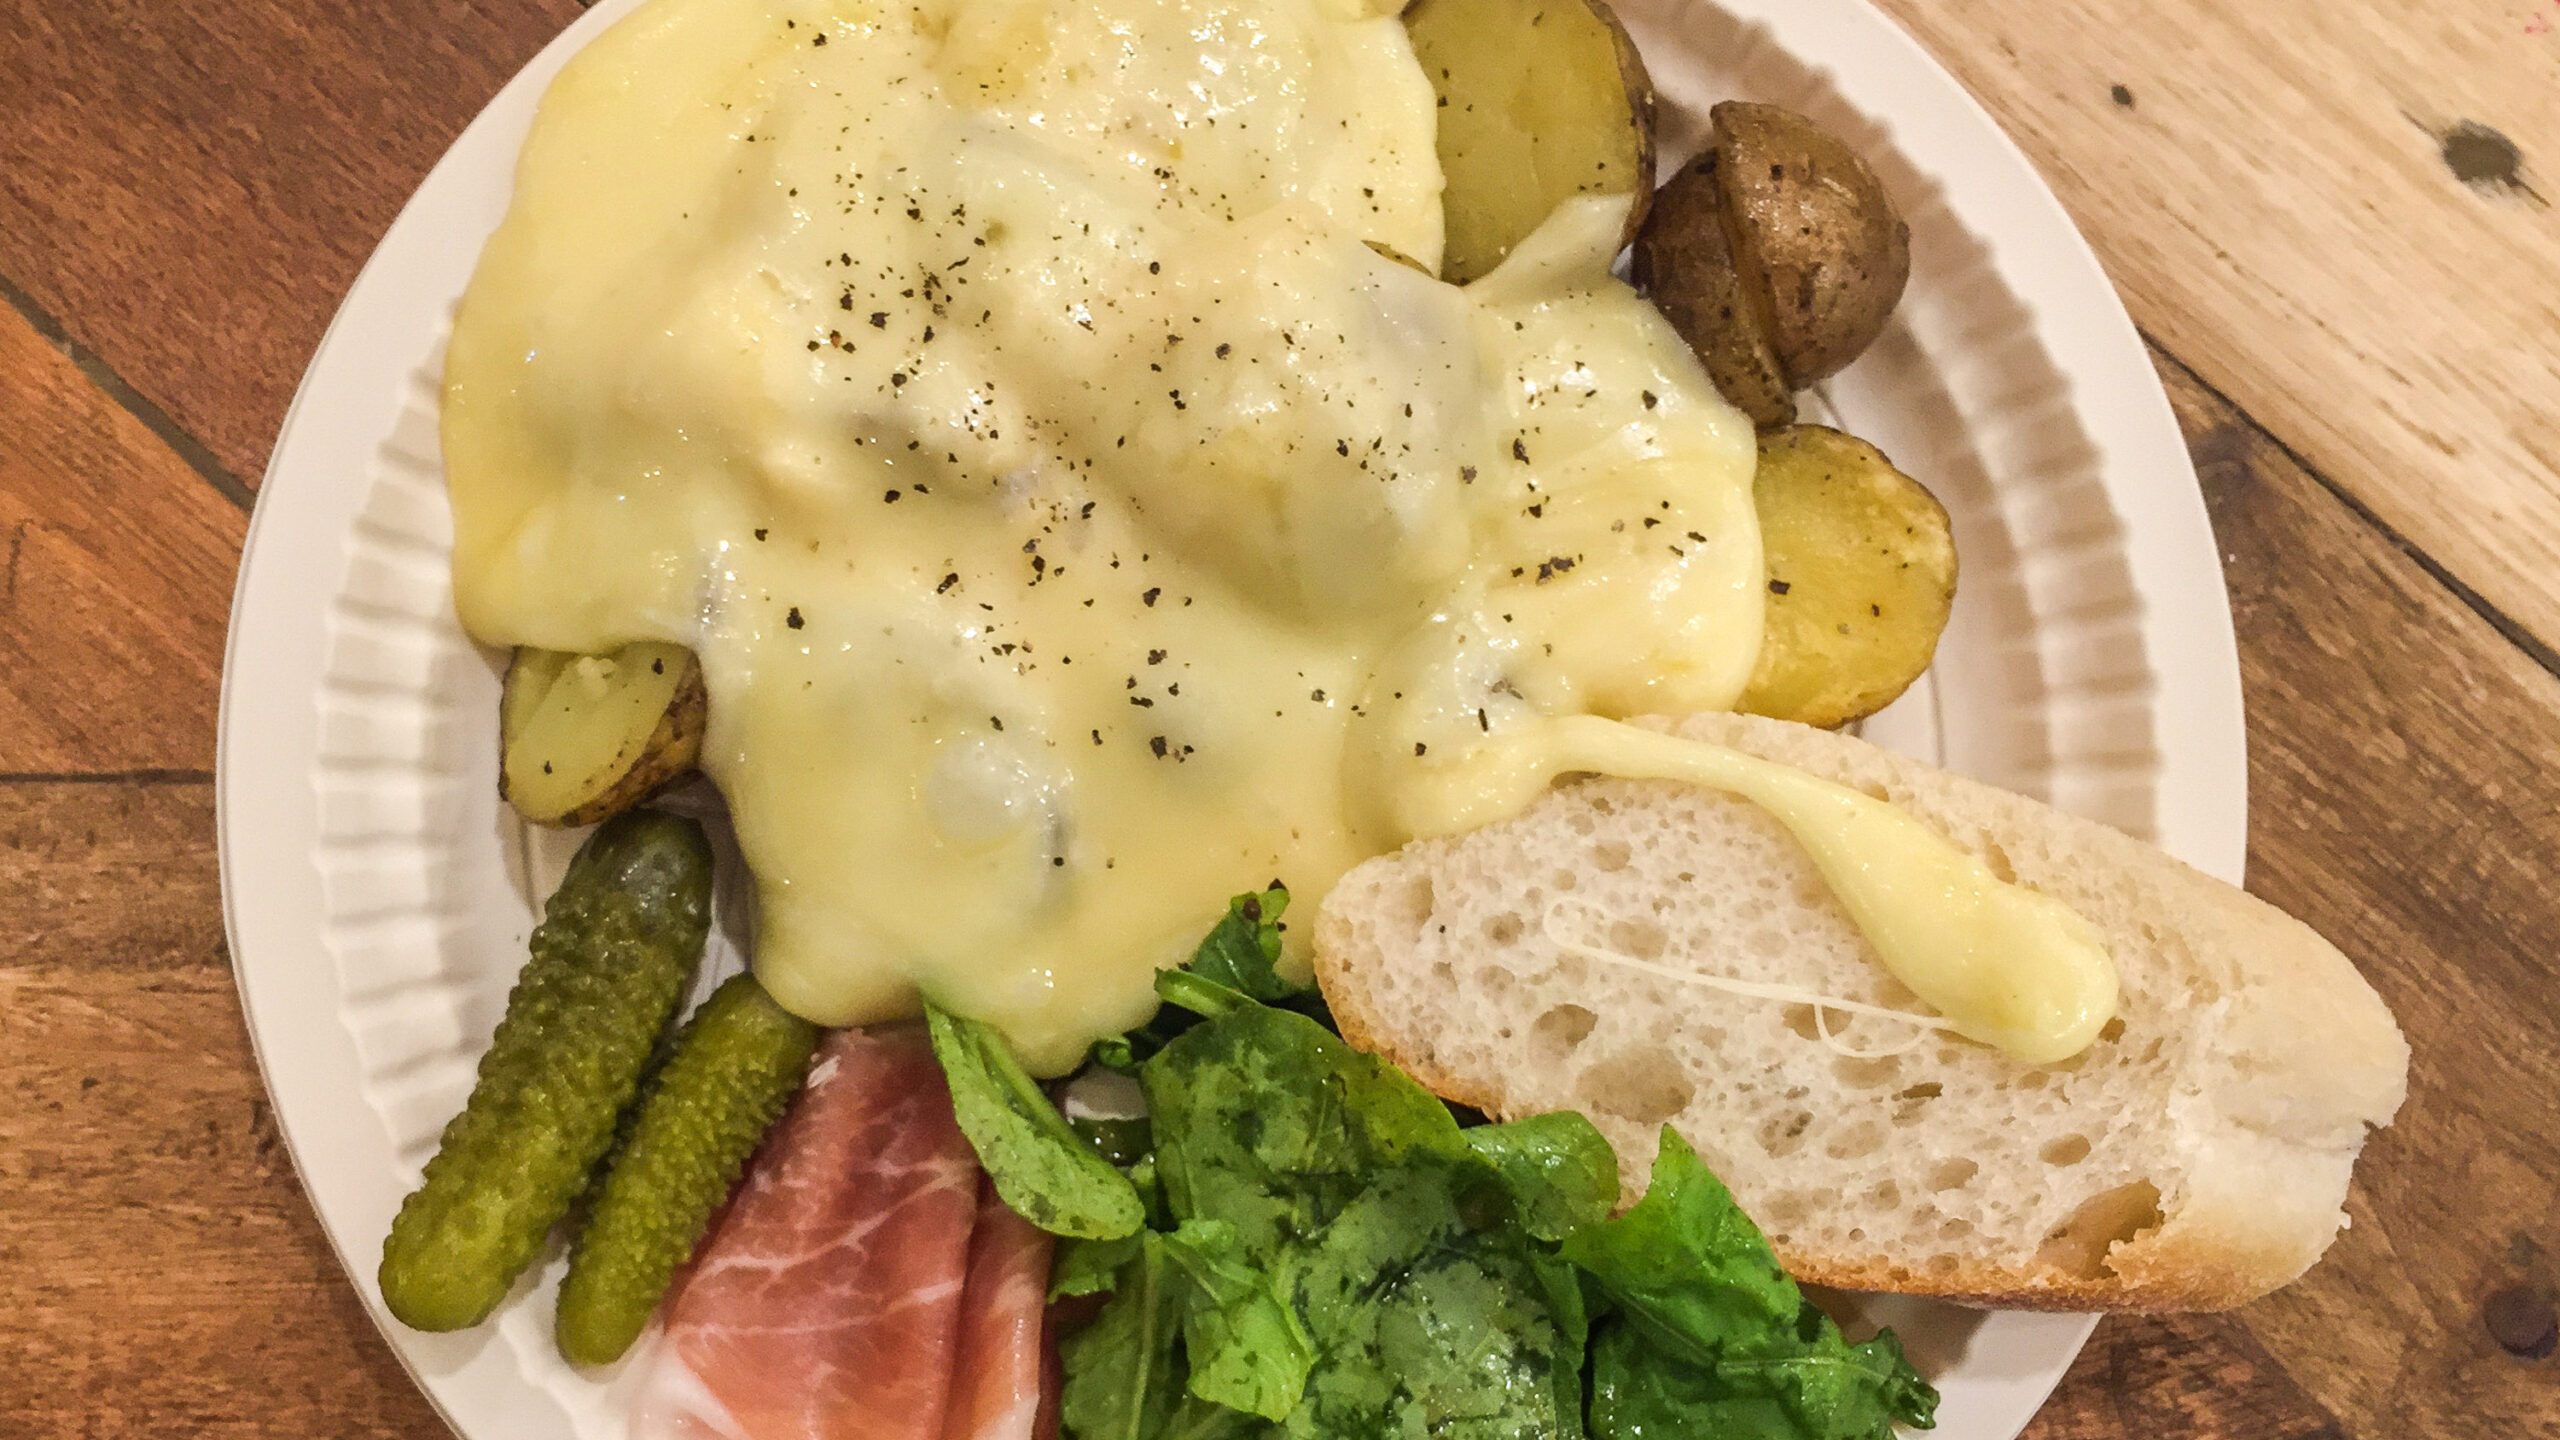 At Raclette Manila, gorge on gooey, melted cheese scraped right off the wheel